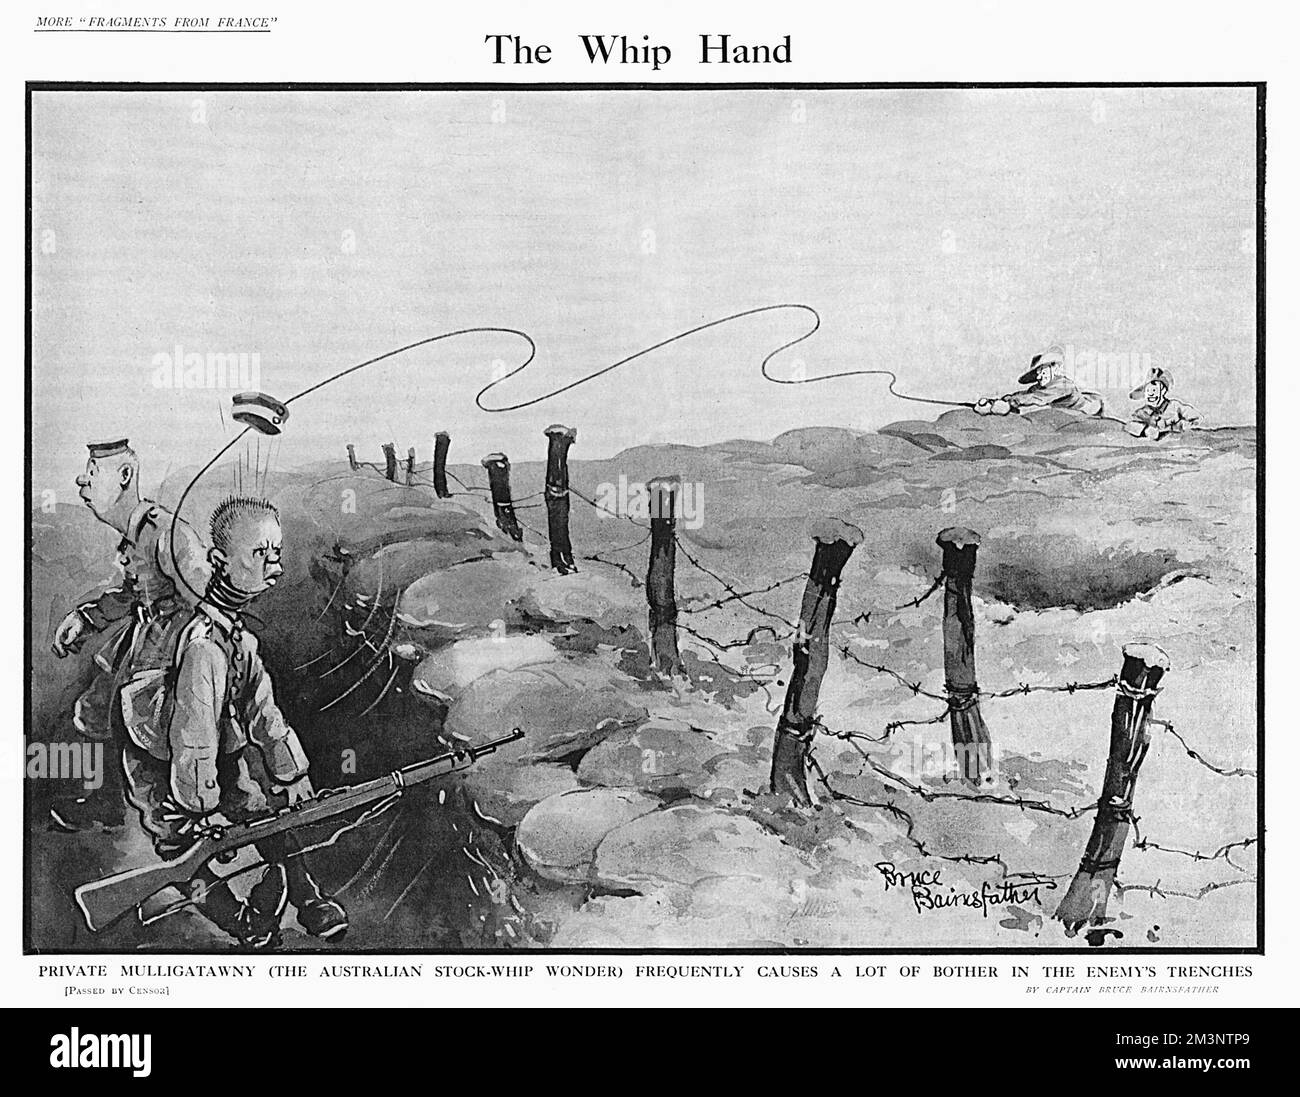 'The Whip Hand'    'Private Mulligatawny (the Australian stock-whip wonder) frequently causes a lot of bother in the enemy's trenches'    Bruce Bairnsfather's &quot;stock whip&quot; cartoon sums up the practical, self-reliant, rough and ready boldness associated with the Aussies. Most Anzac troops were deployed in the Middle East, and of course at Gallipoli, before being sent to the Western Front in 1916 (the time of this picture). the Australians were no walkover, and many felt bitterly let down by what they considered the badly judged British command and the resultant poorly organised Britis Stock Photo